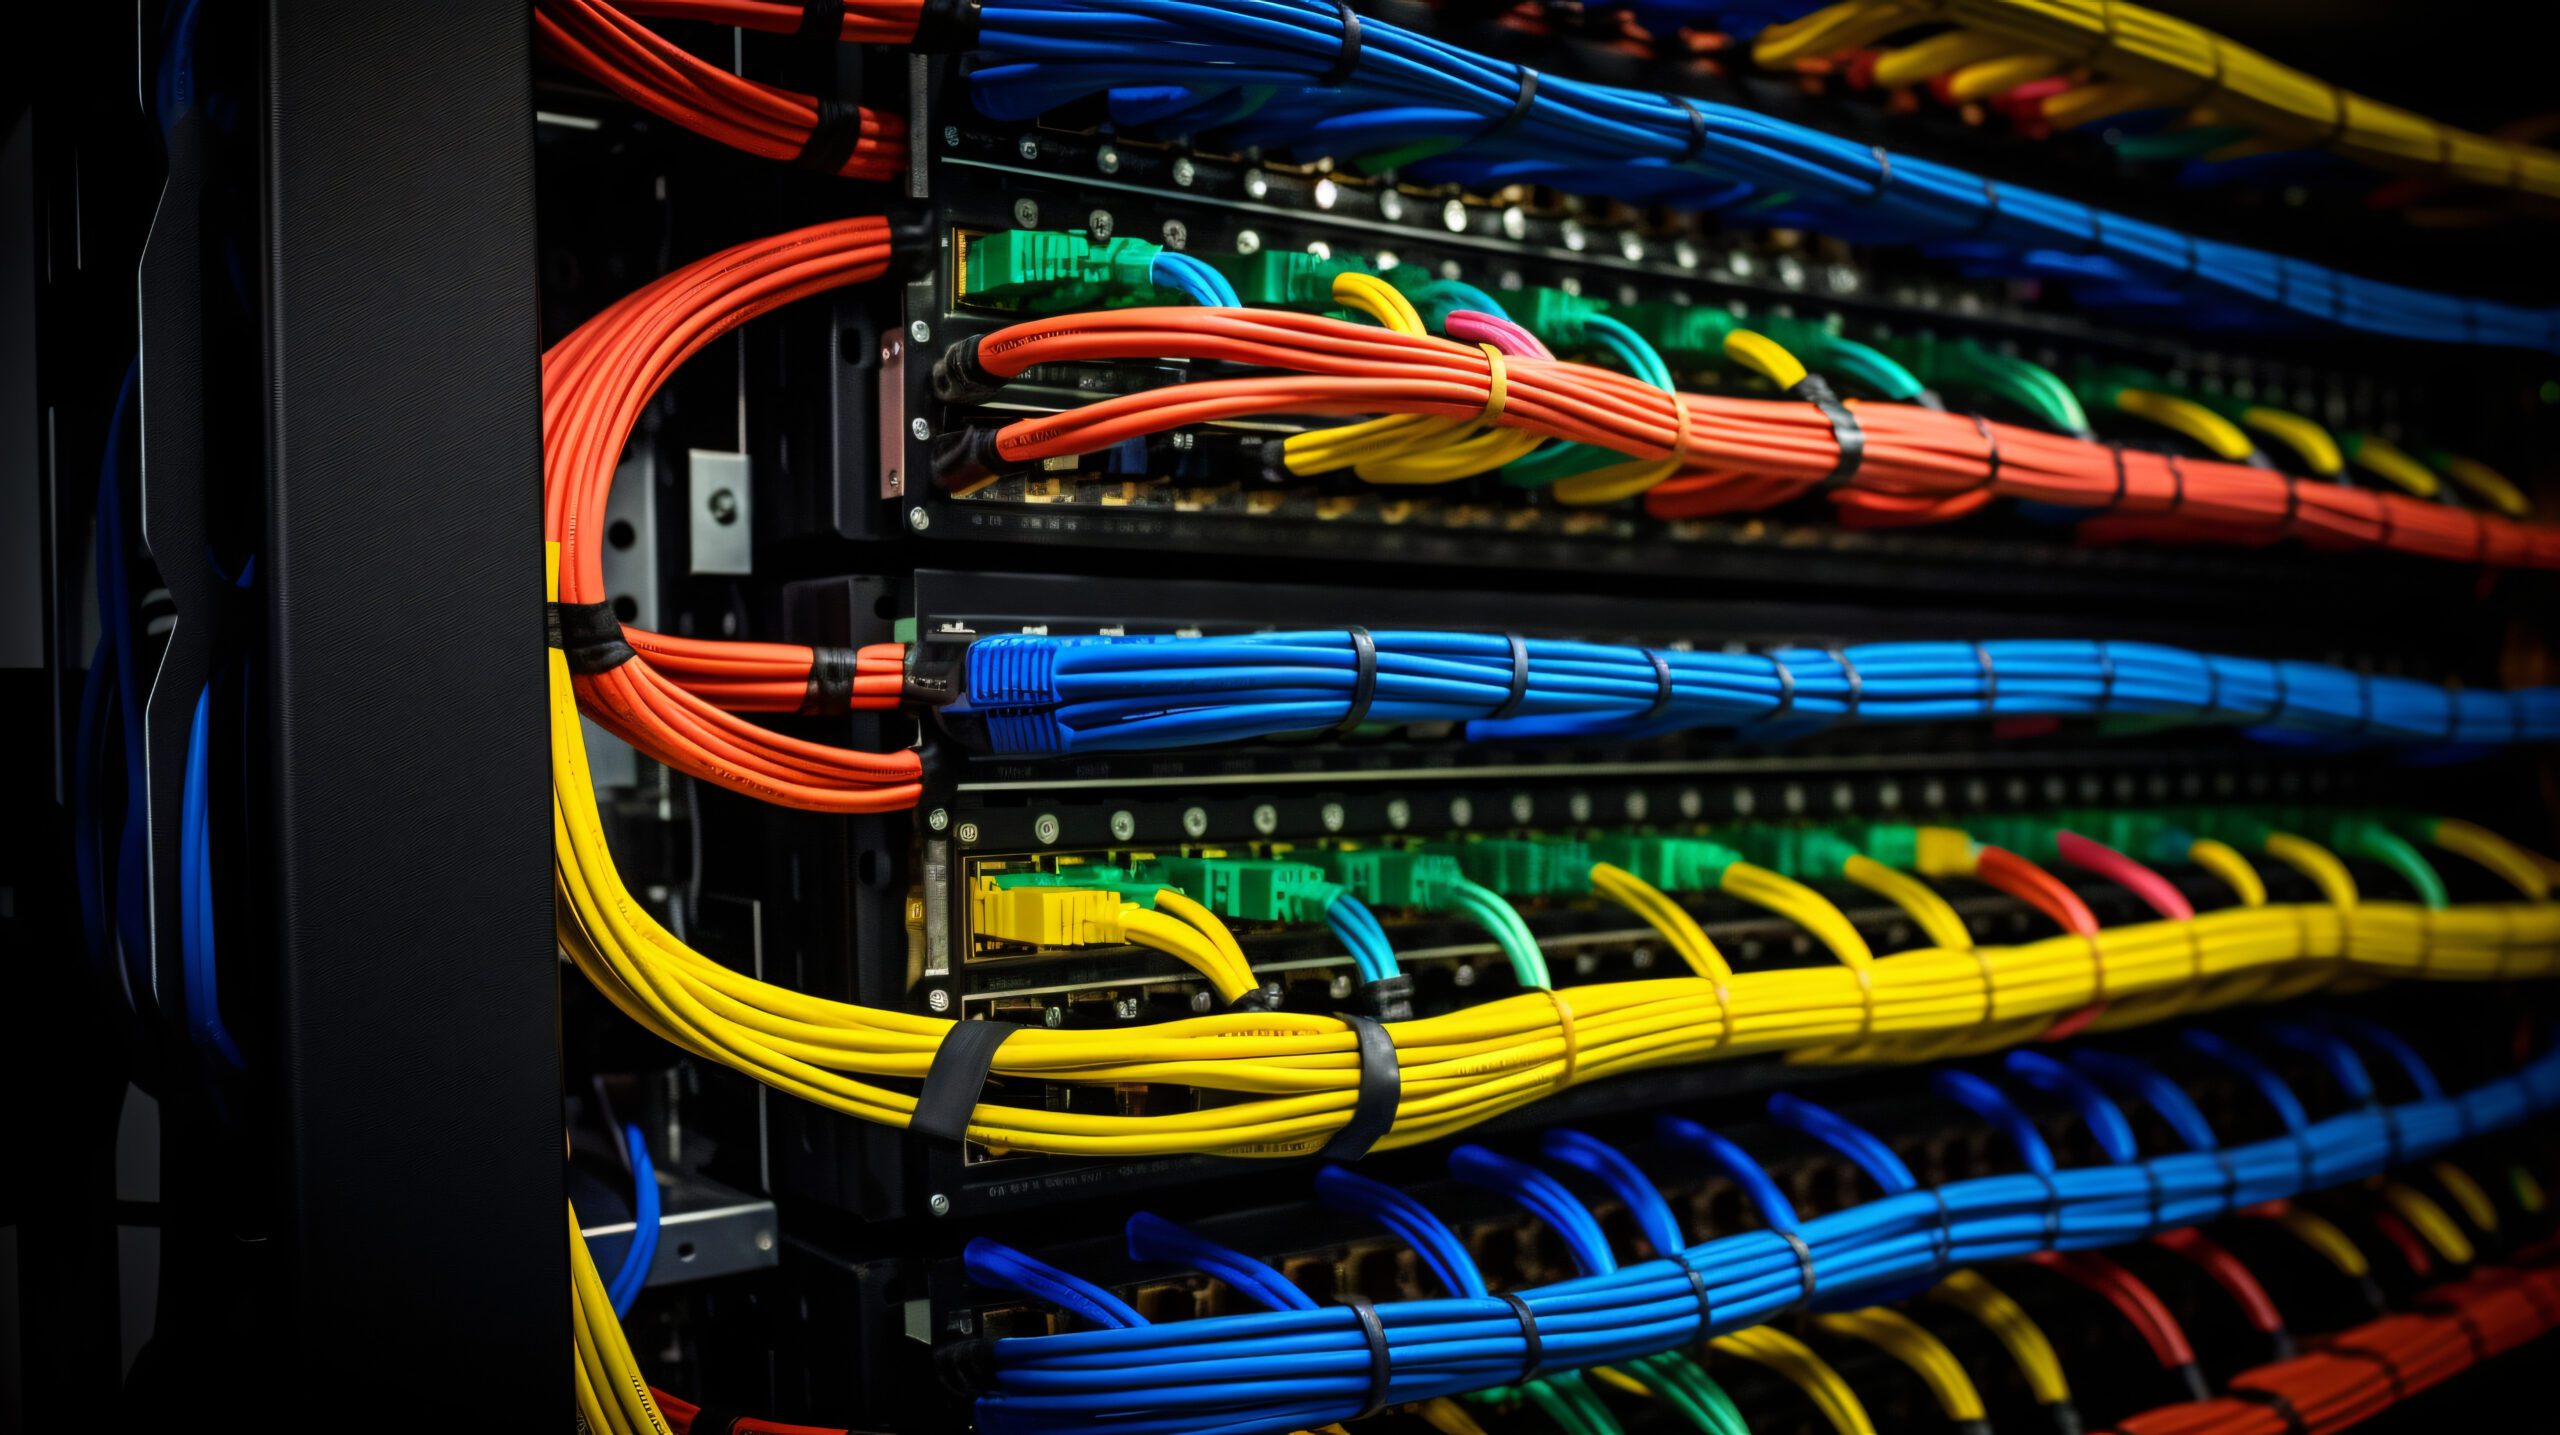 A close-up shot of a networking cabling management system.